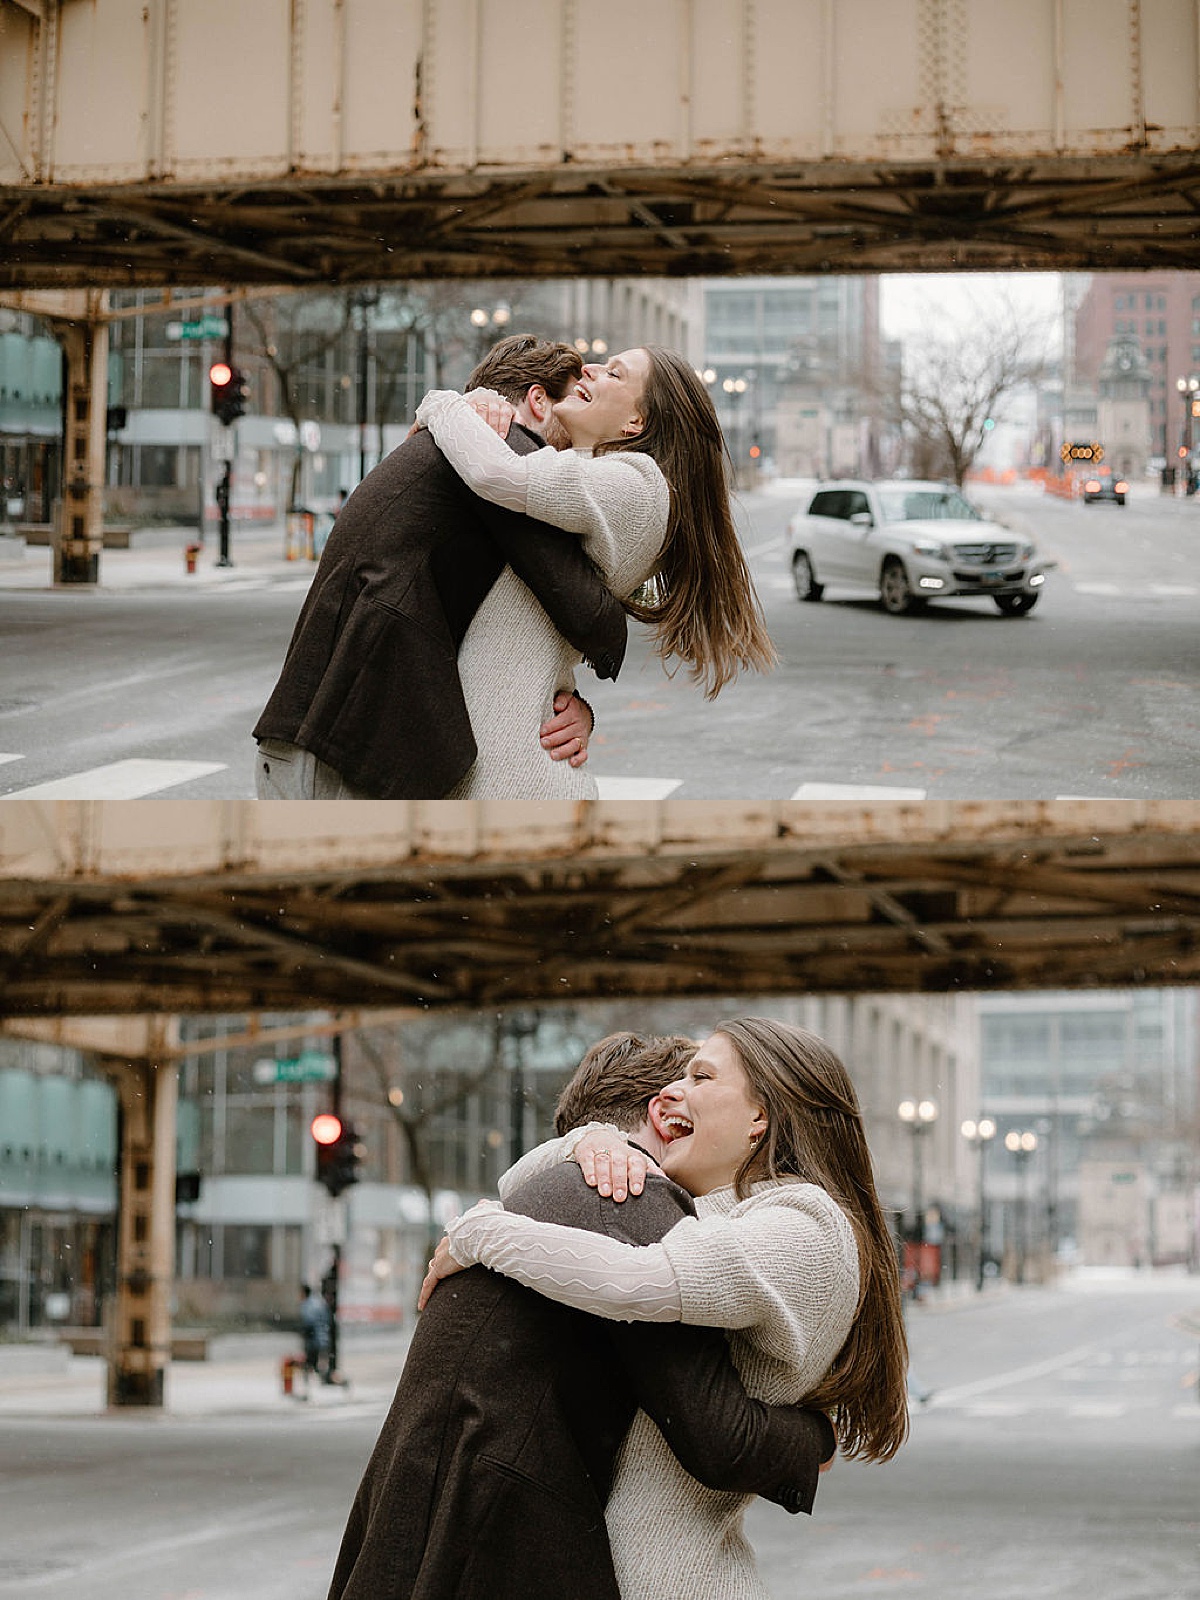 bride laughs in delight as she embraces groom after Chicago elopement shot by Indigo Lace Collective